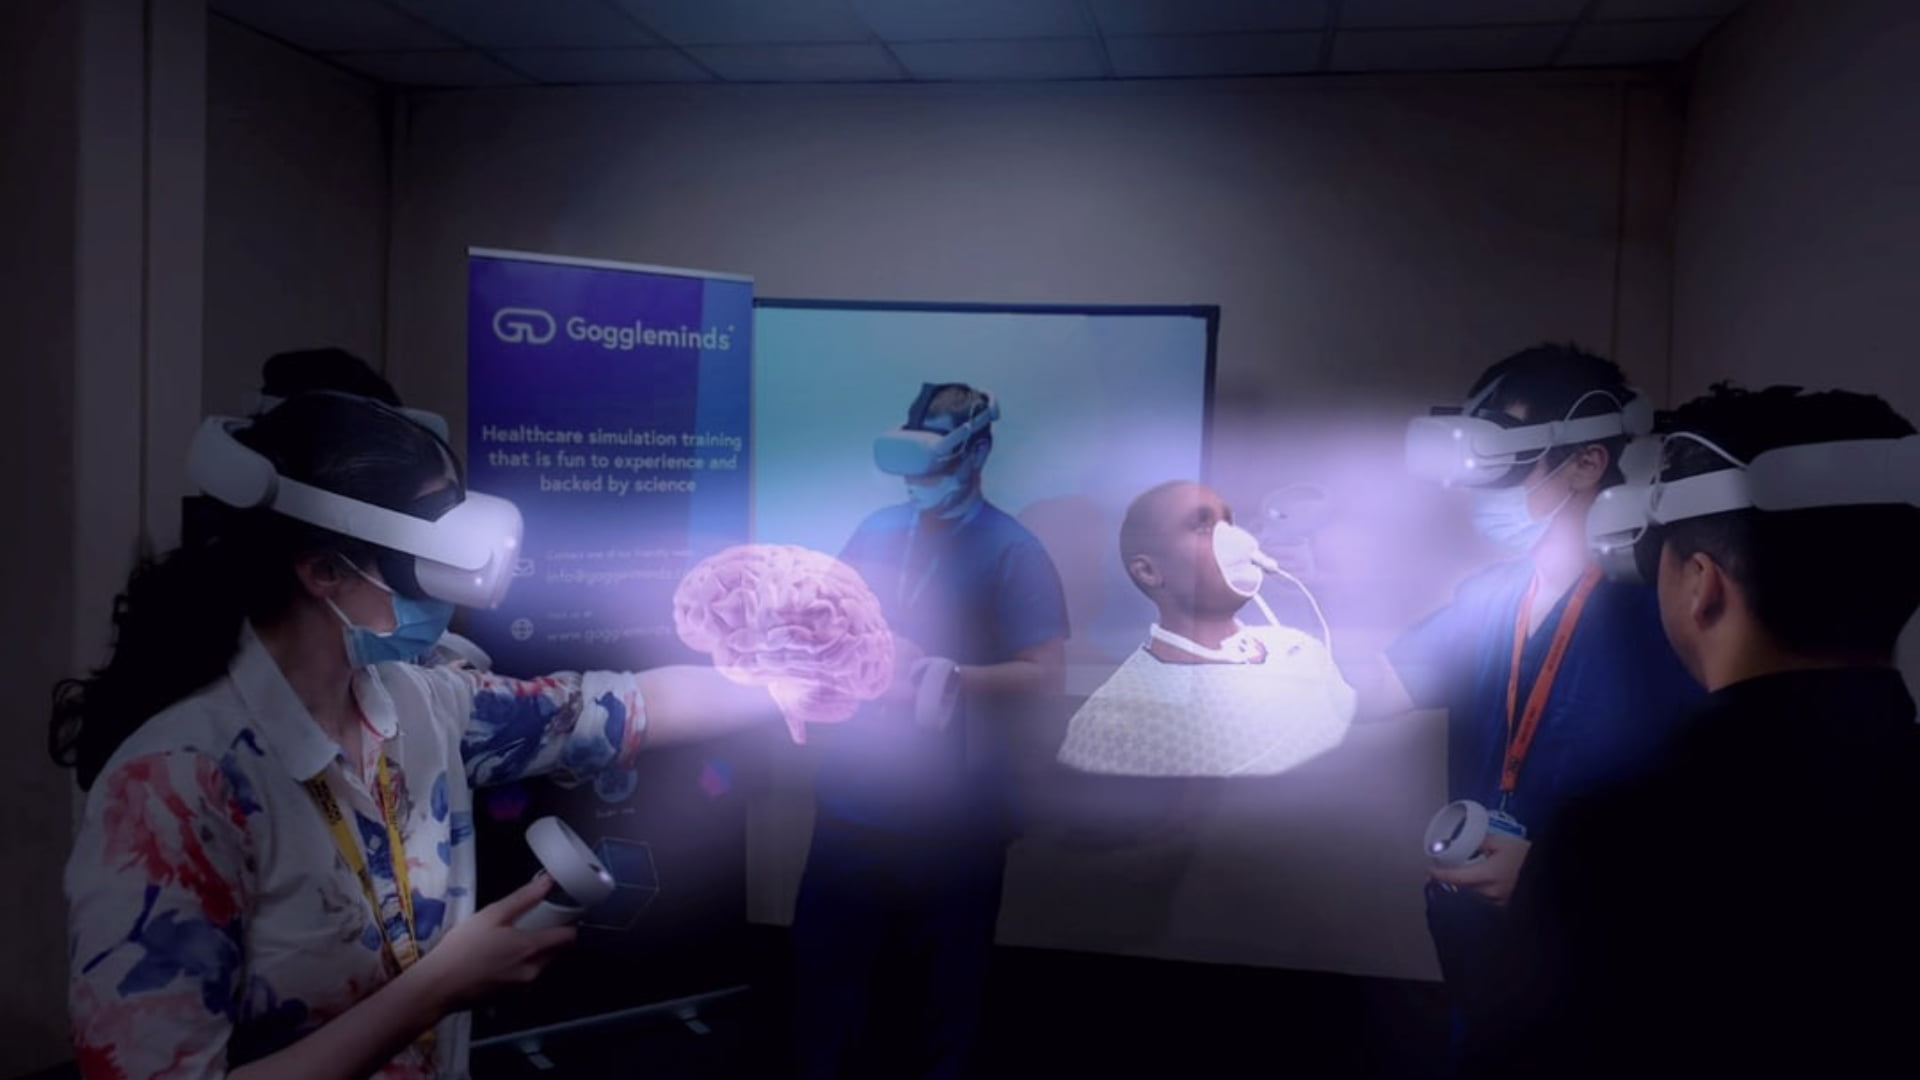 A UK startup develops the “Mediverse” to train healthcare professionals in VR